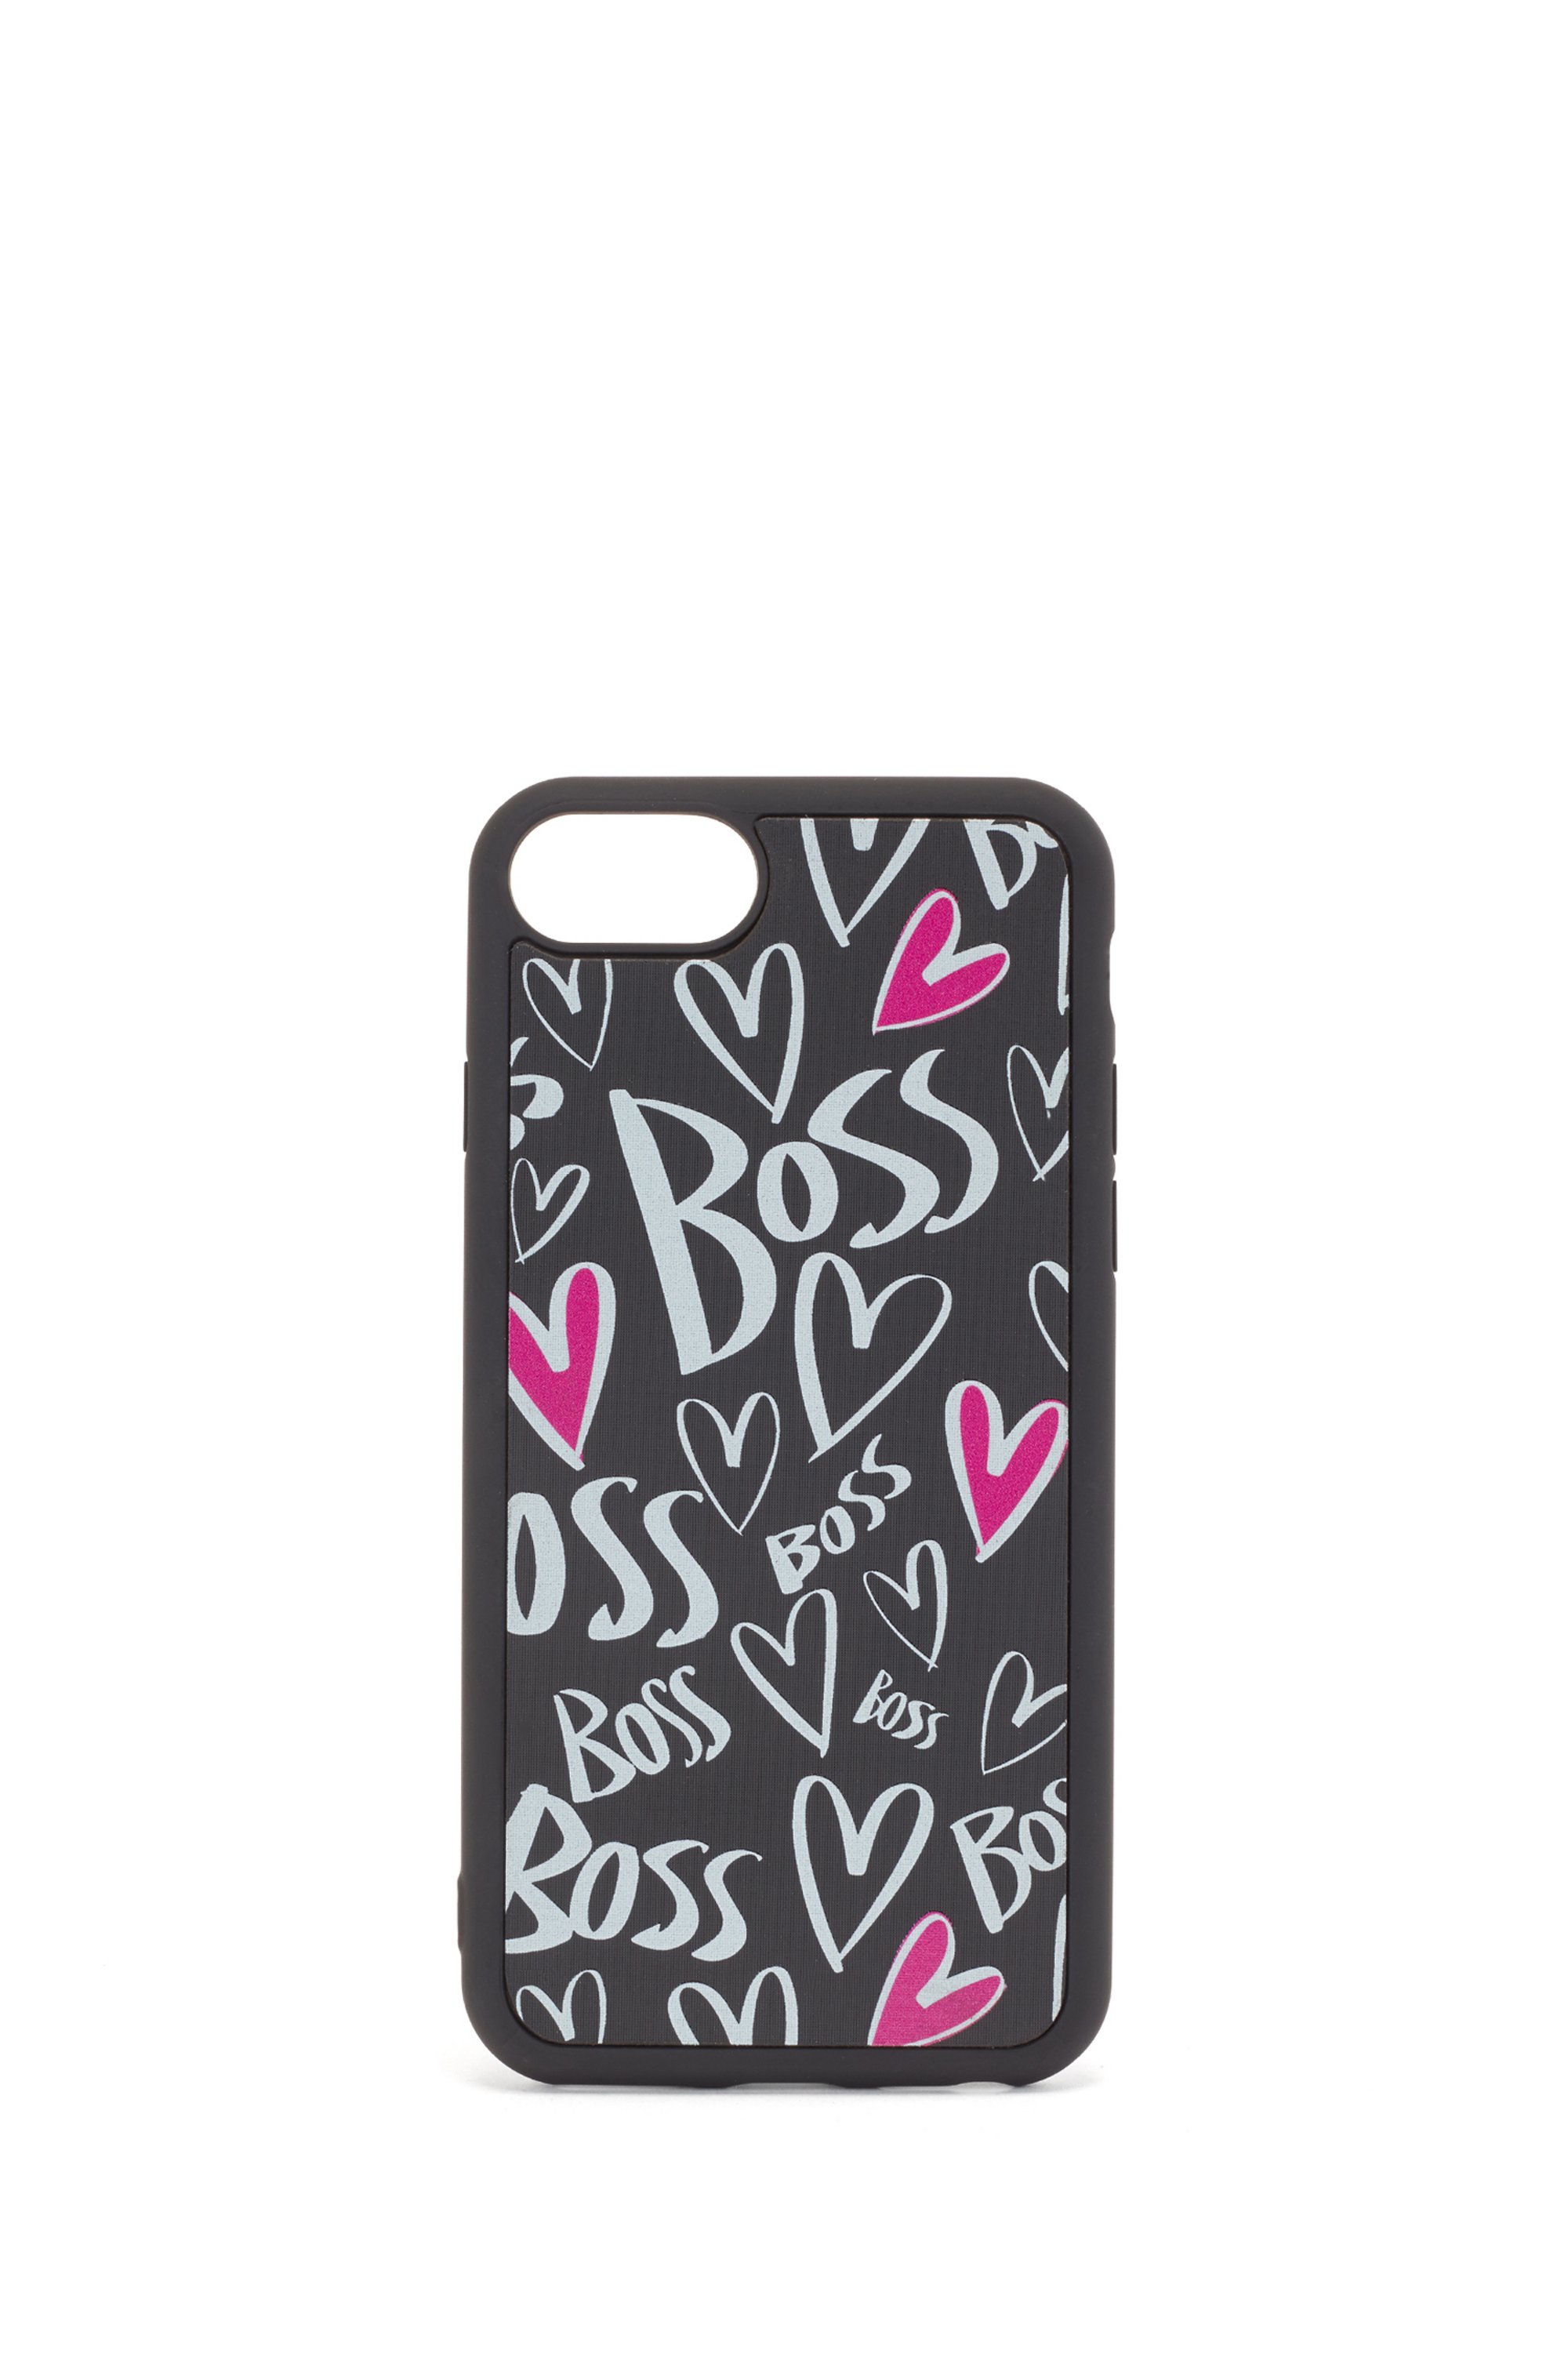 iPhone case with printed hearts and logos, Black